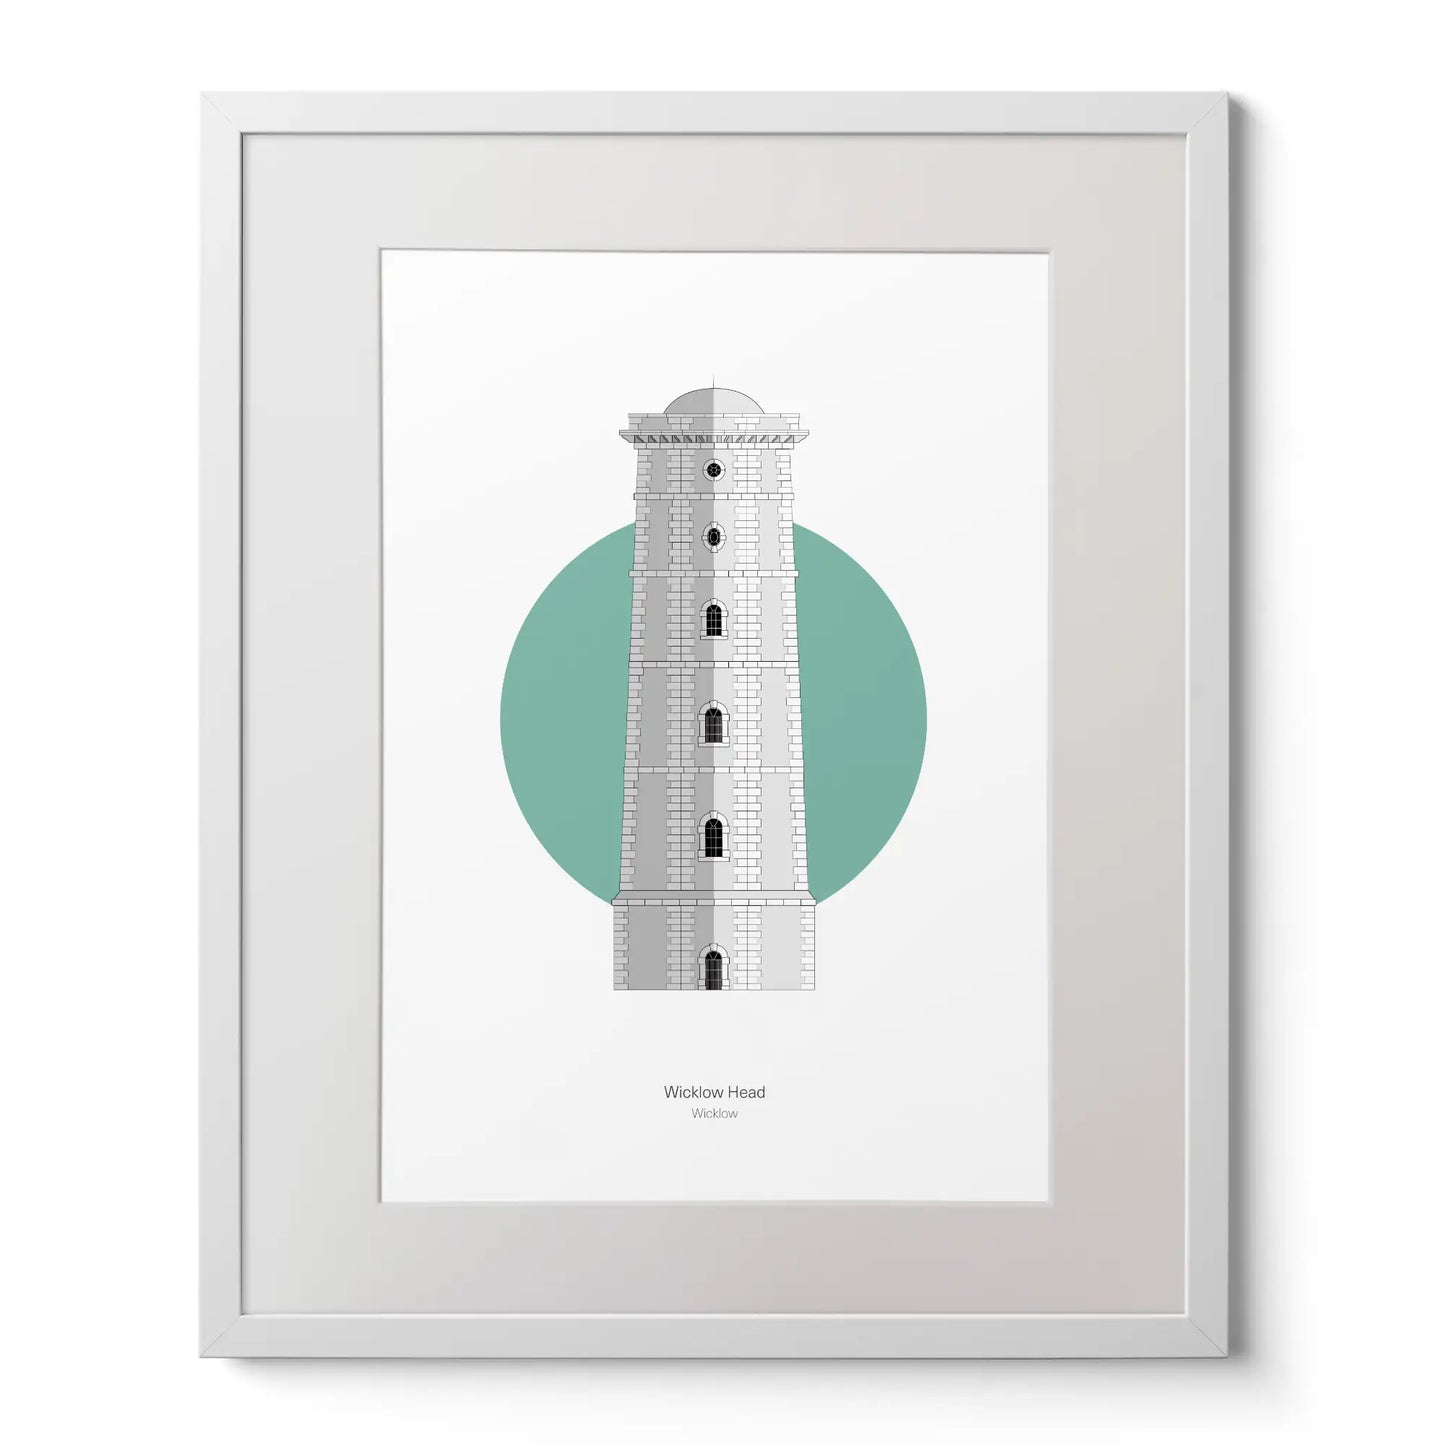 Illustration of Wicklow lighthouse on a white background inside light blue square,  in a white frame measuring 40x50cm.